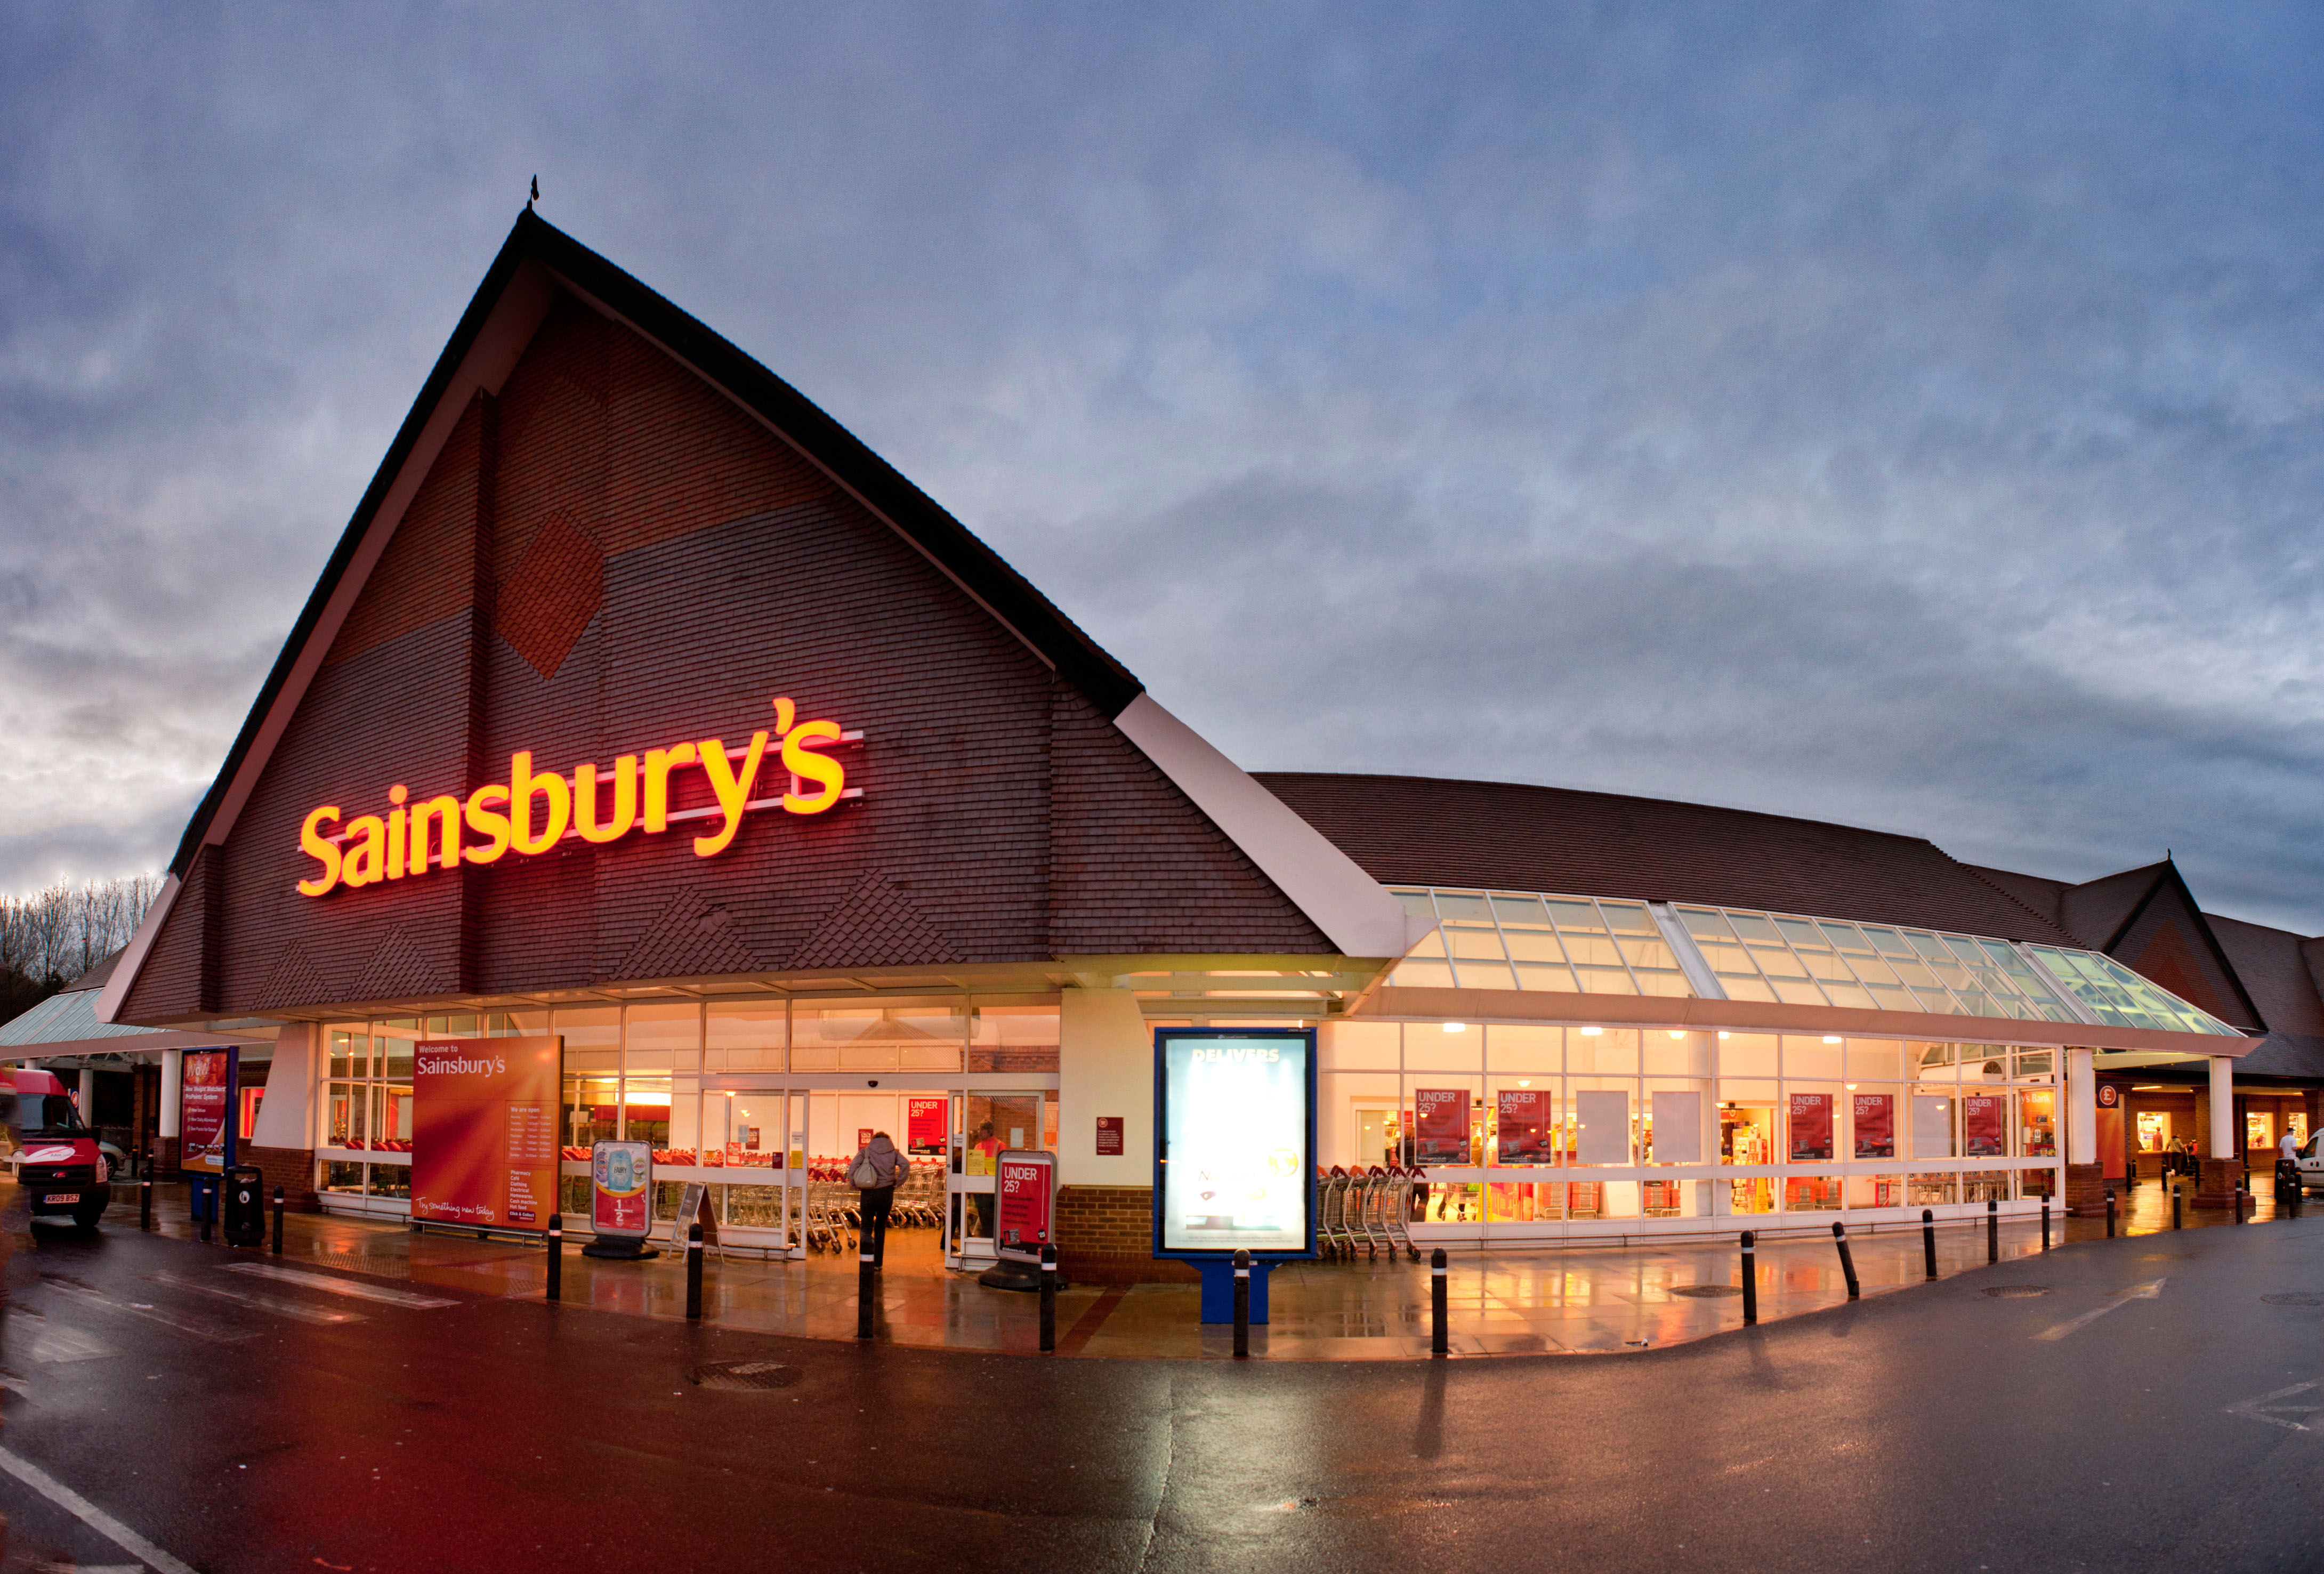 You'll have to be quick if you want to nab one of the reduced joints from Sainsbury's